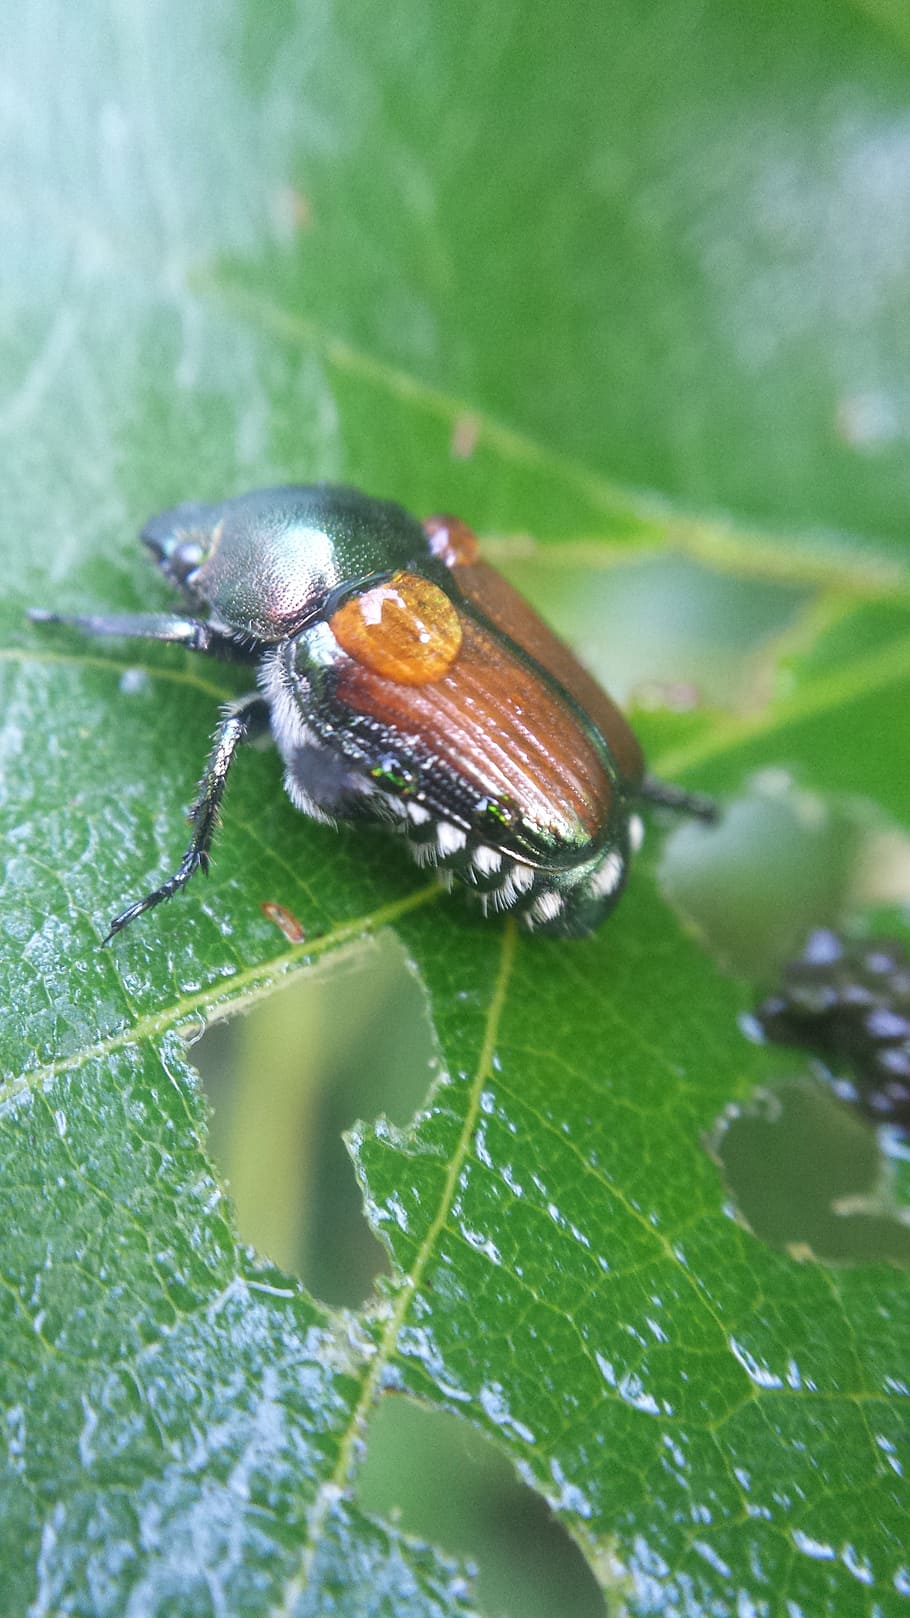 Beetle on grapevine., dew, insect, bug, wet, animal wildlife